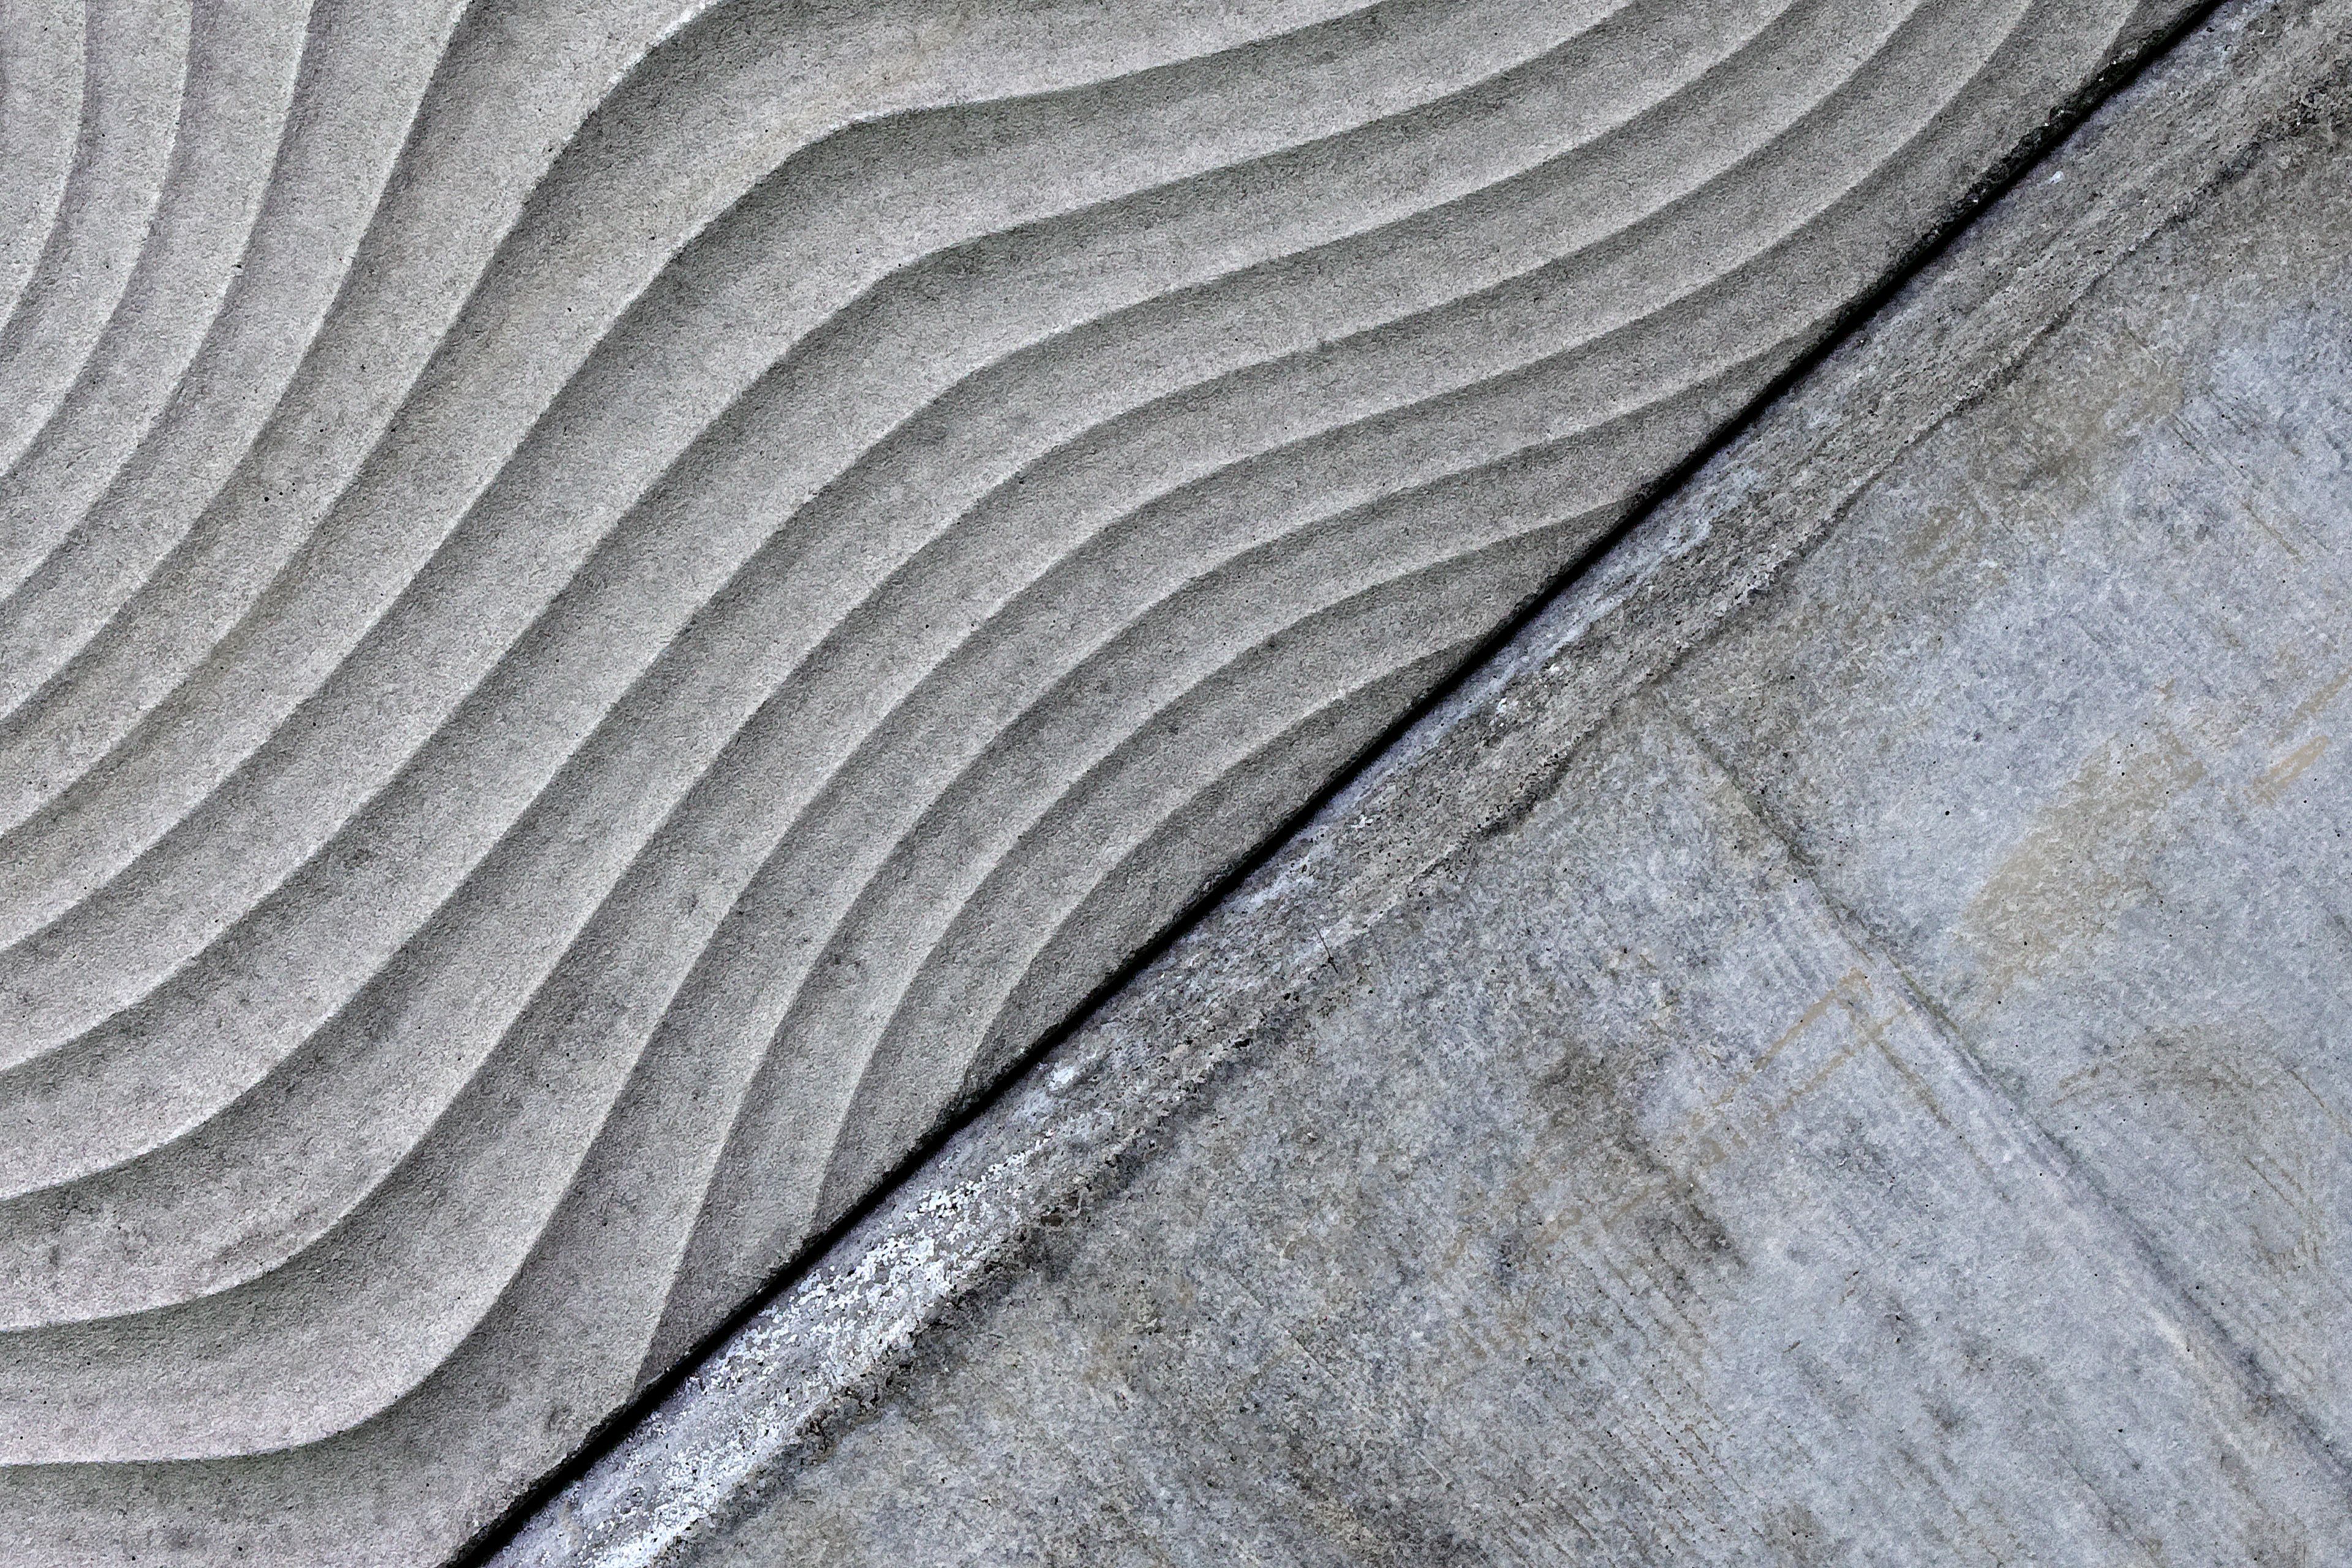 Architectural textured concrete wall produced with Sika concrete admixtures at Limmat building in Zurich